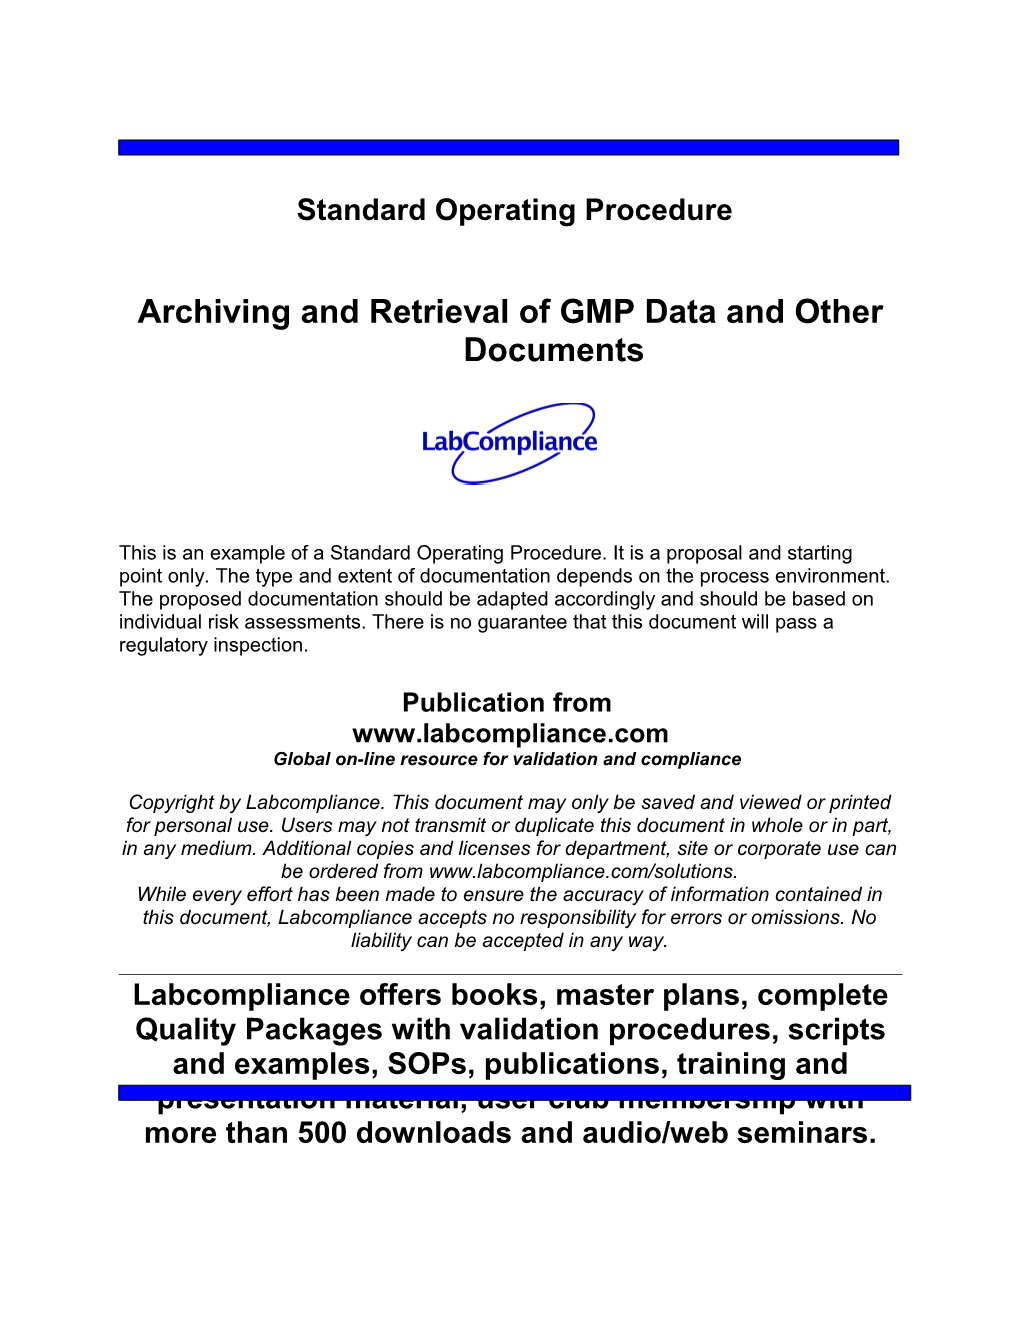 Archiving and Retrieval of GMP Data and Other Documents